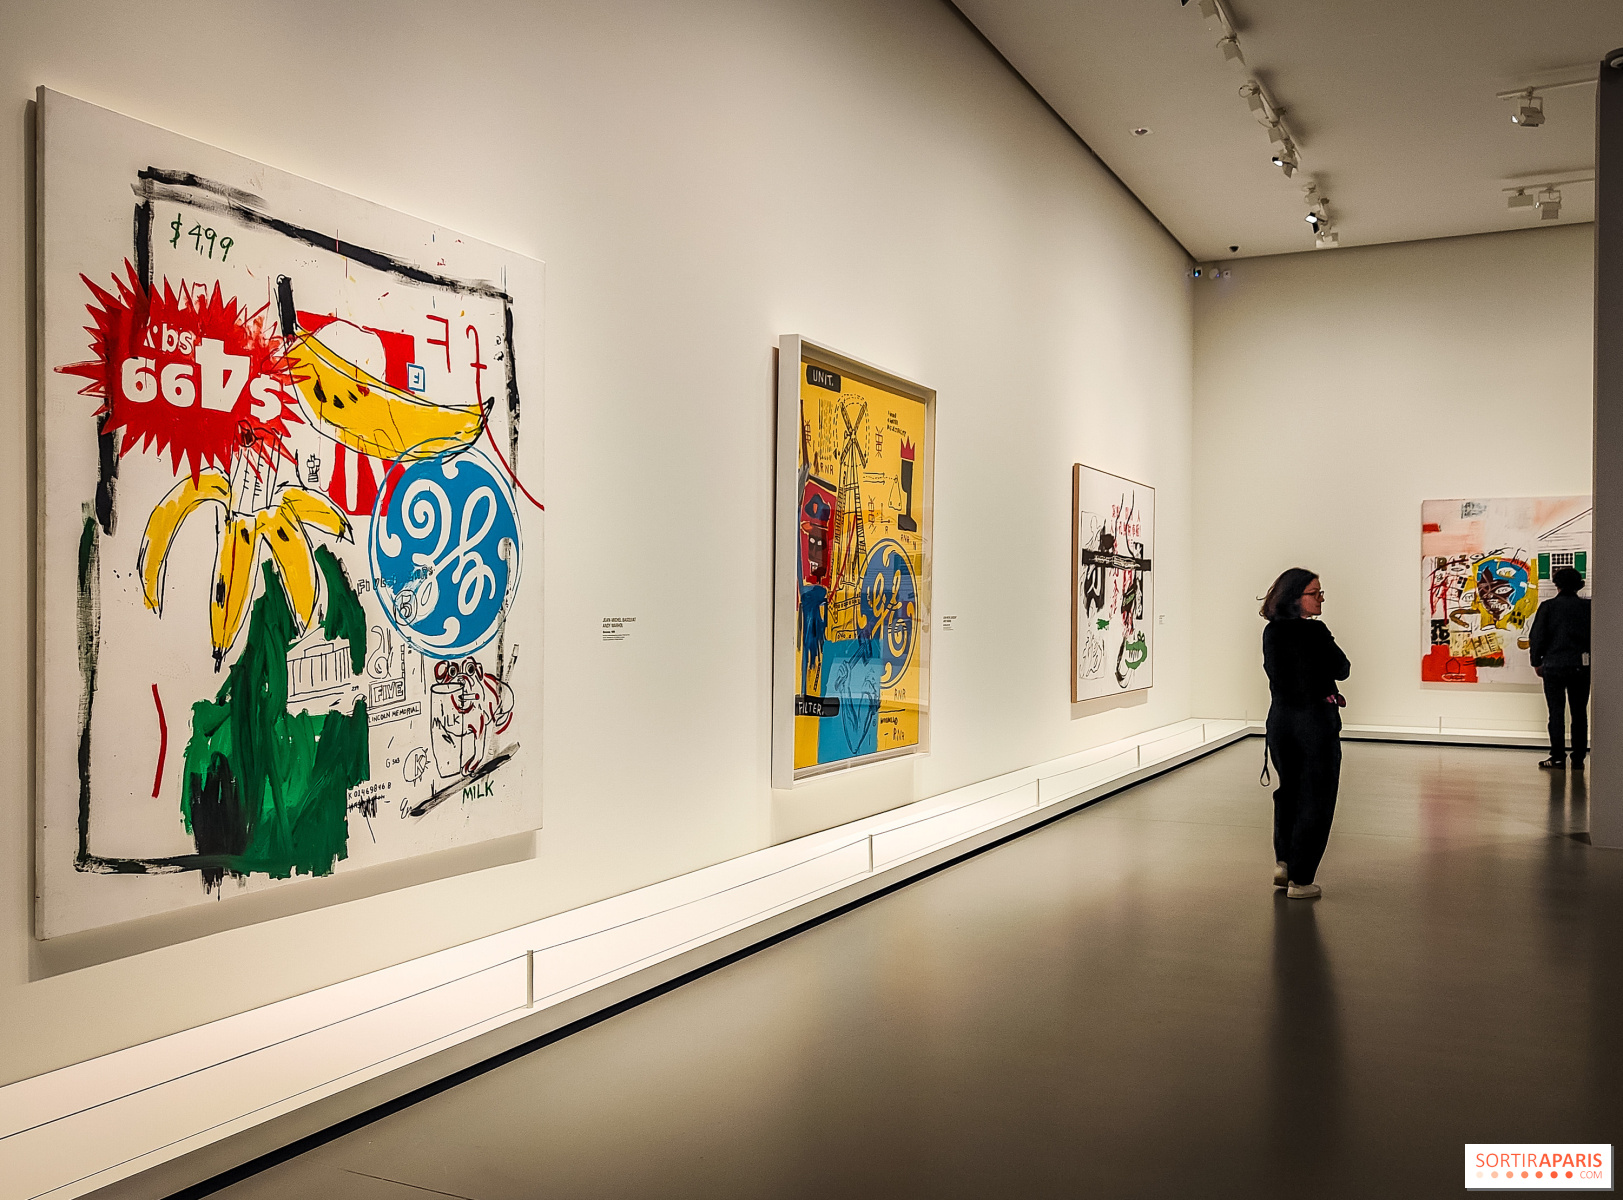 Homage to the Jean Michel Basquiat Exhibition Fondation Louis Vuitton  Spaghetti Smarties Painting